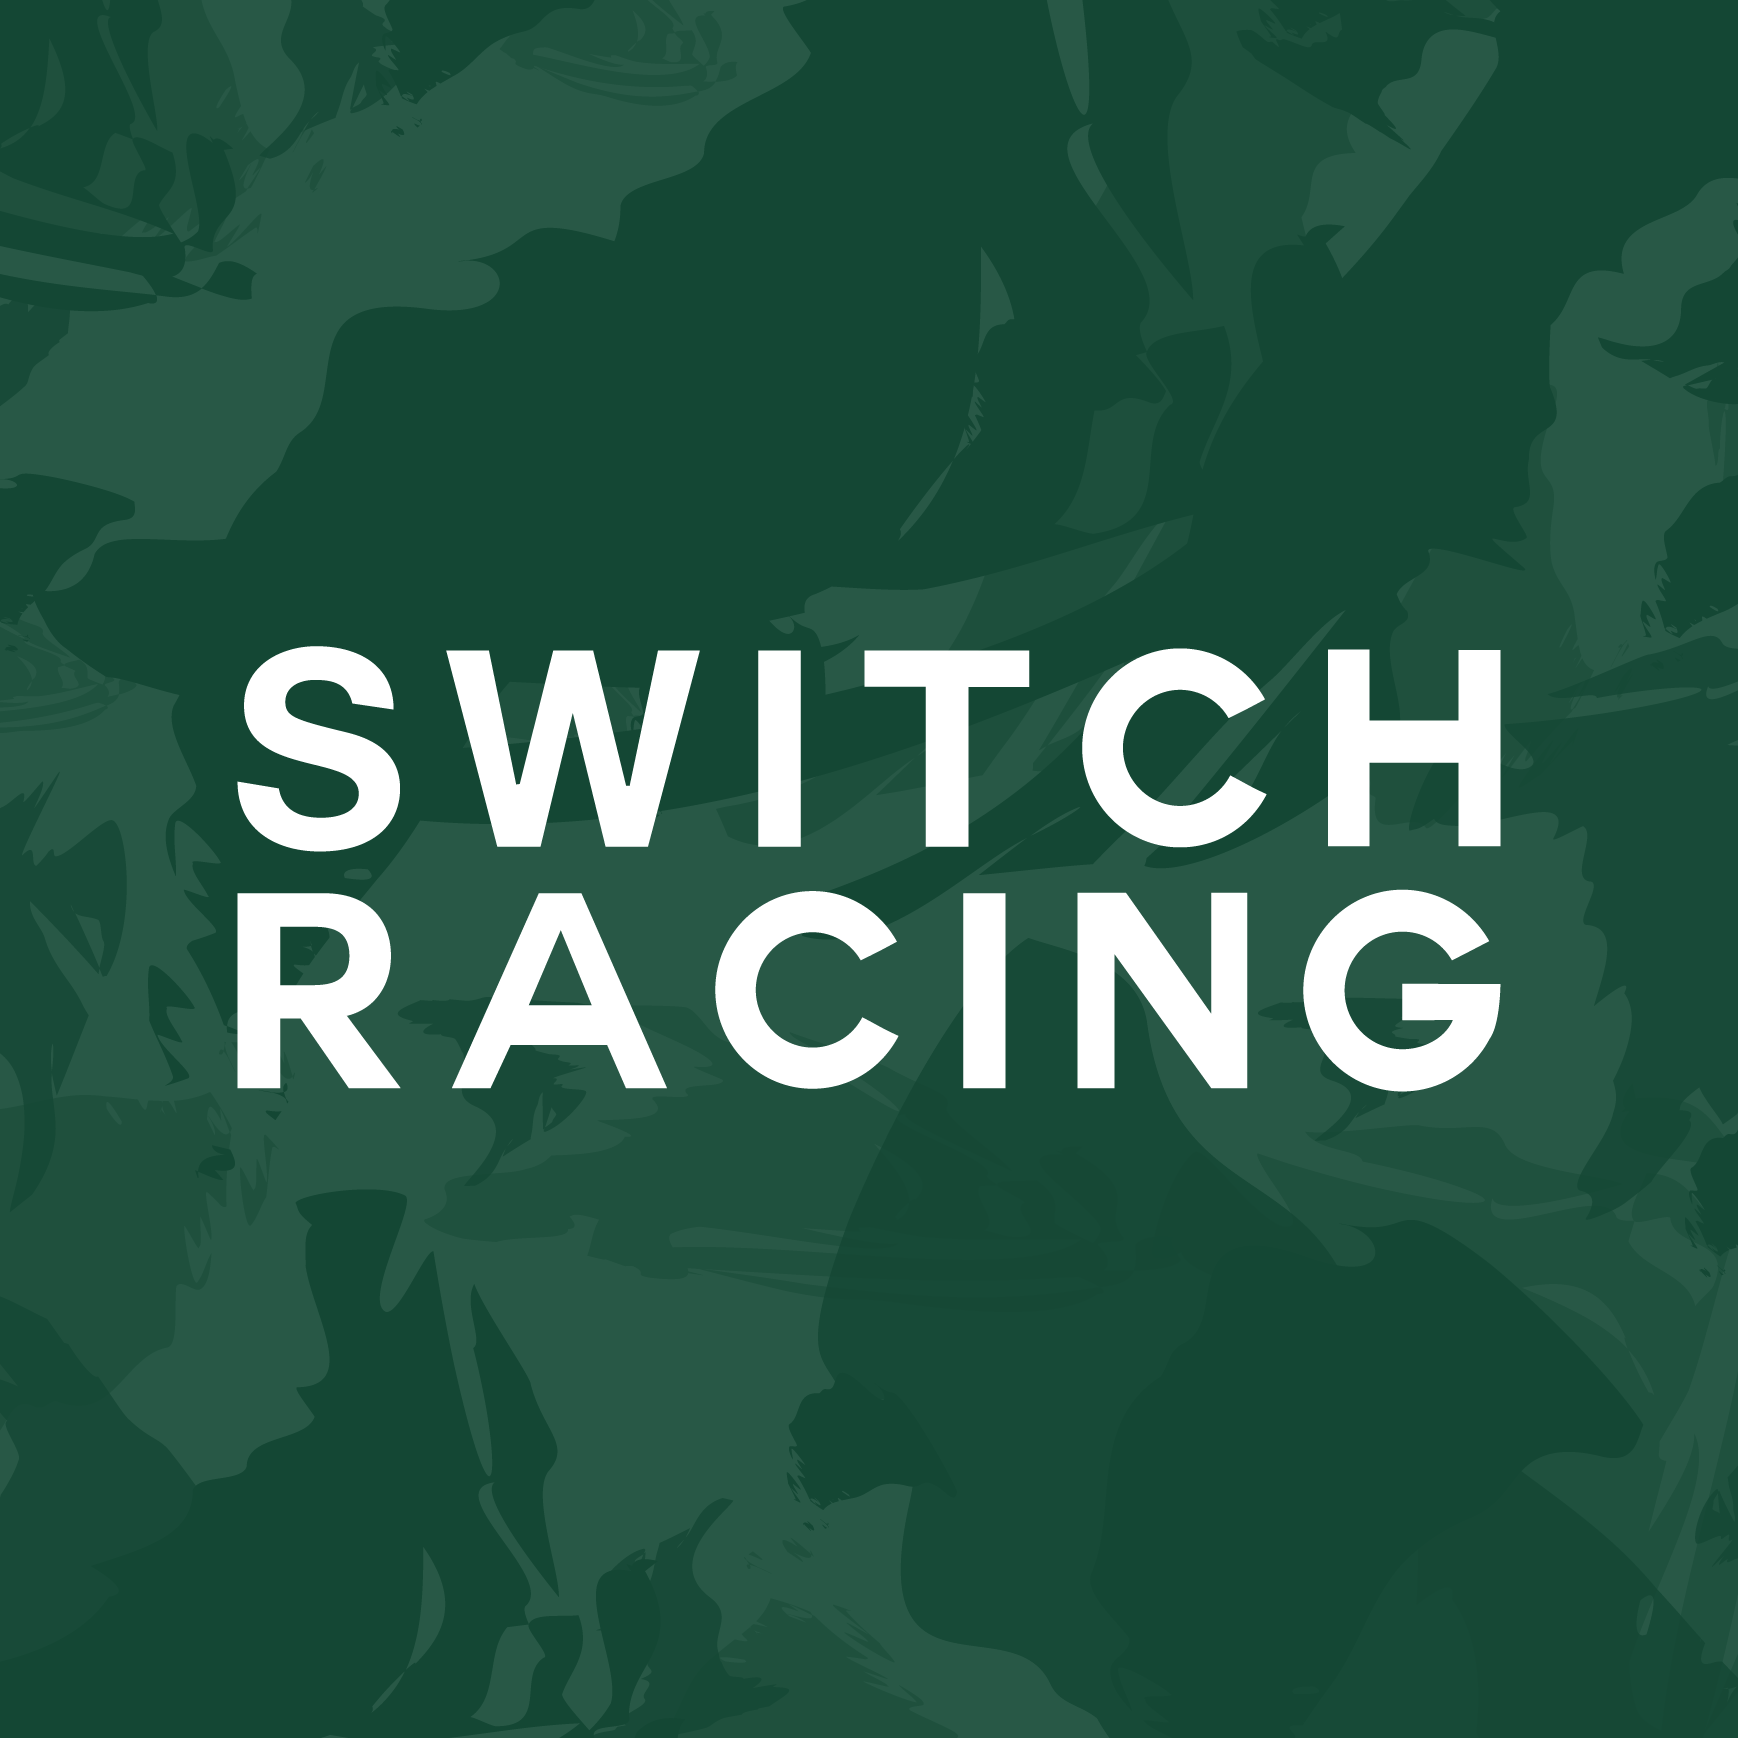 Club Image for SWITCH RACING